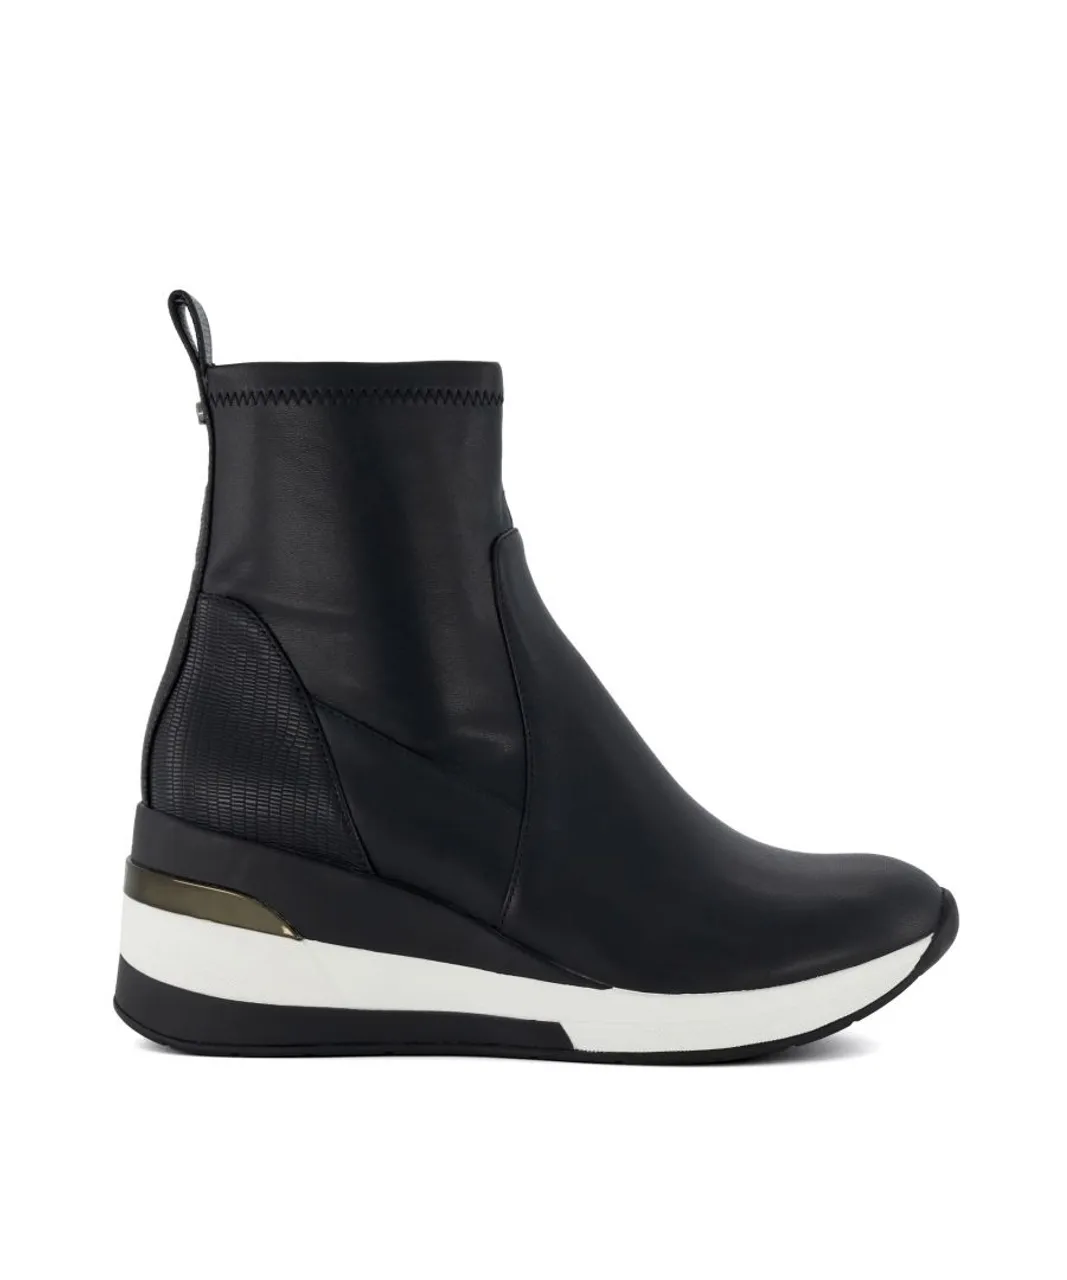 Dune London Womens Ladies EVERETTE Wedge-Heeled Leather Sock Trainers - Black Leather (archived)